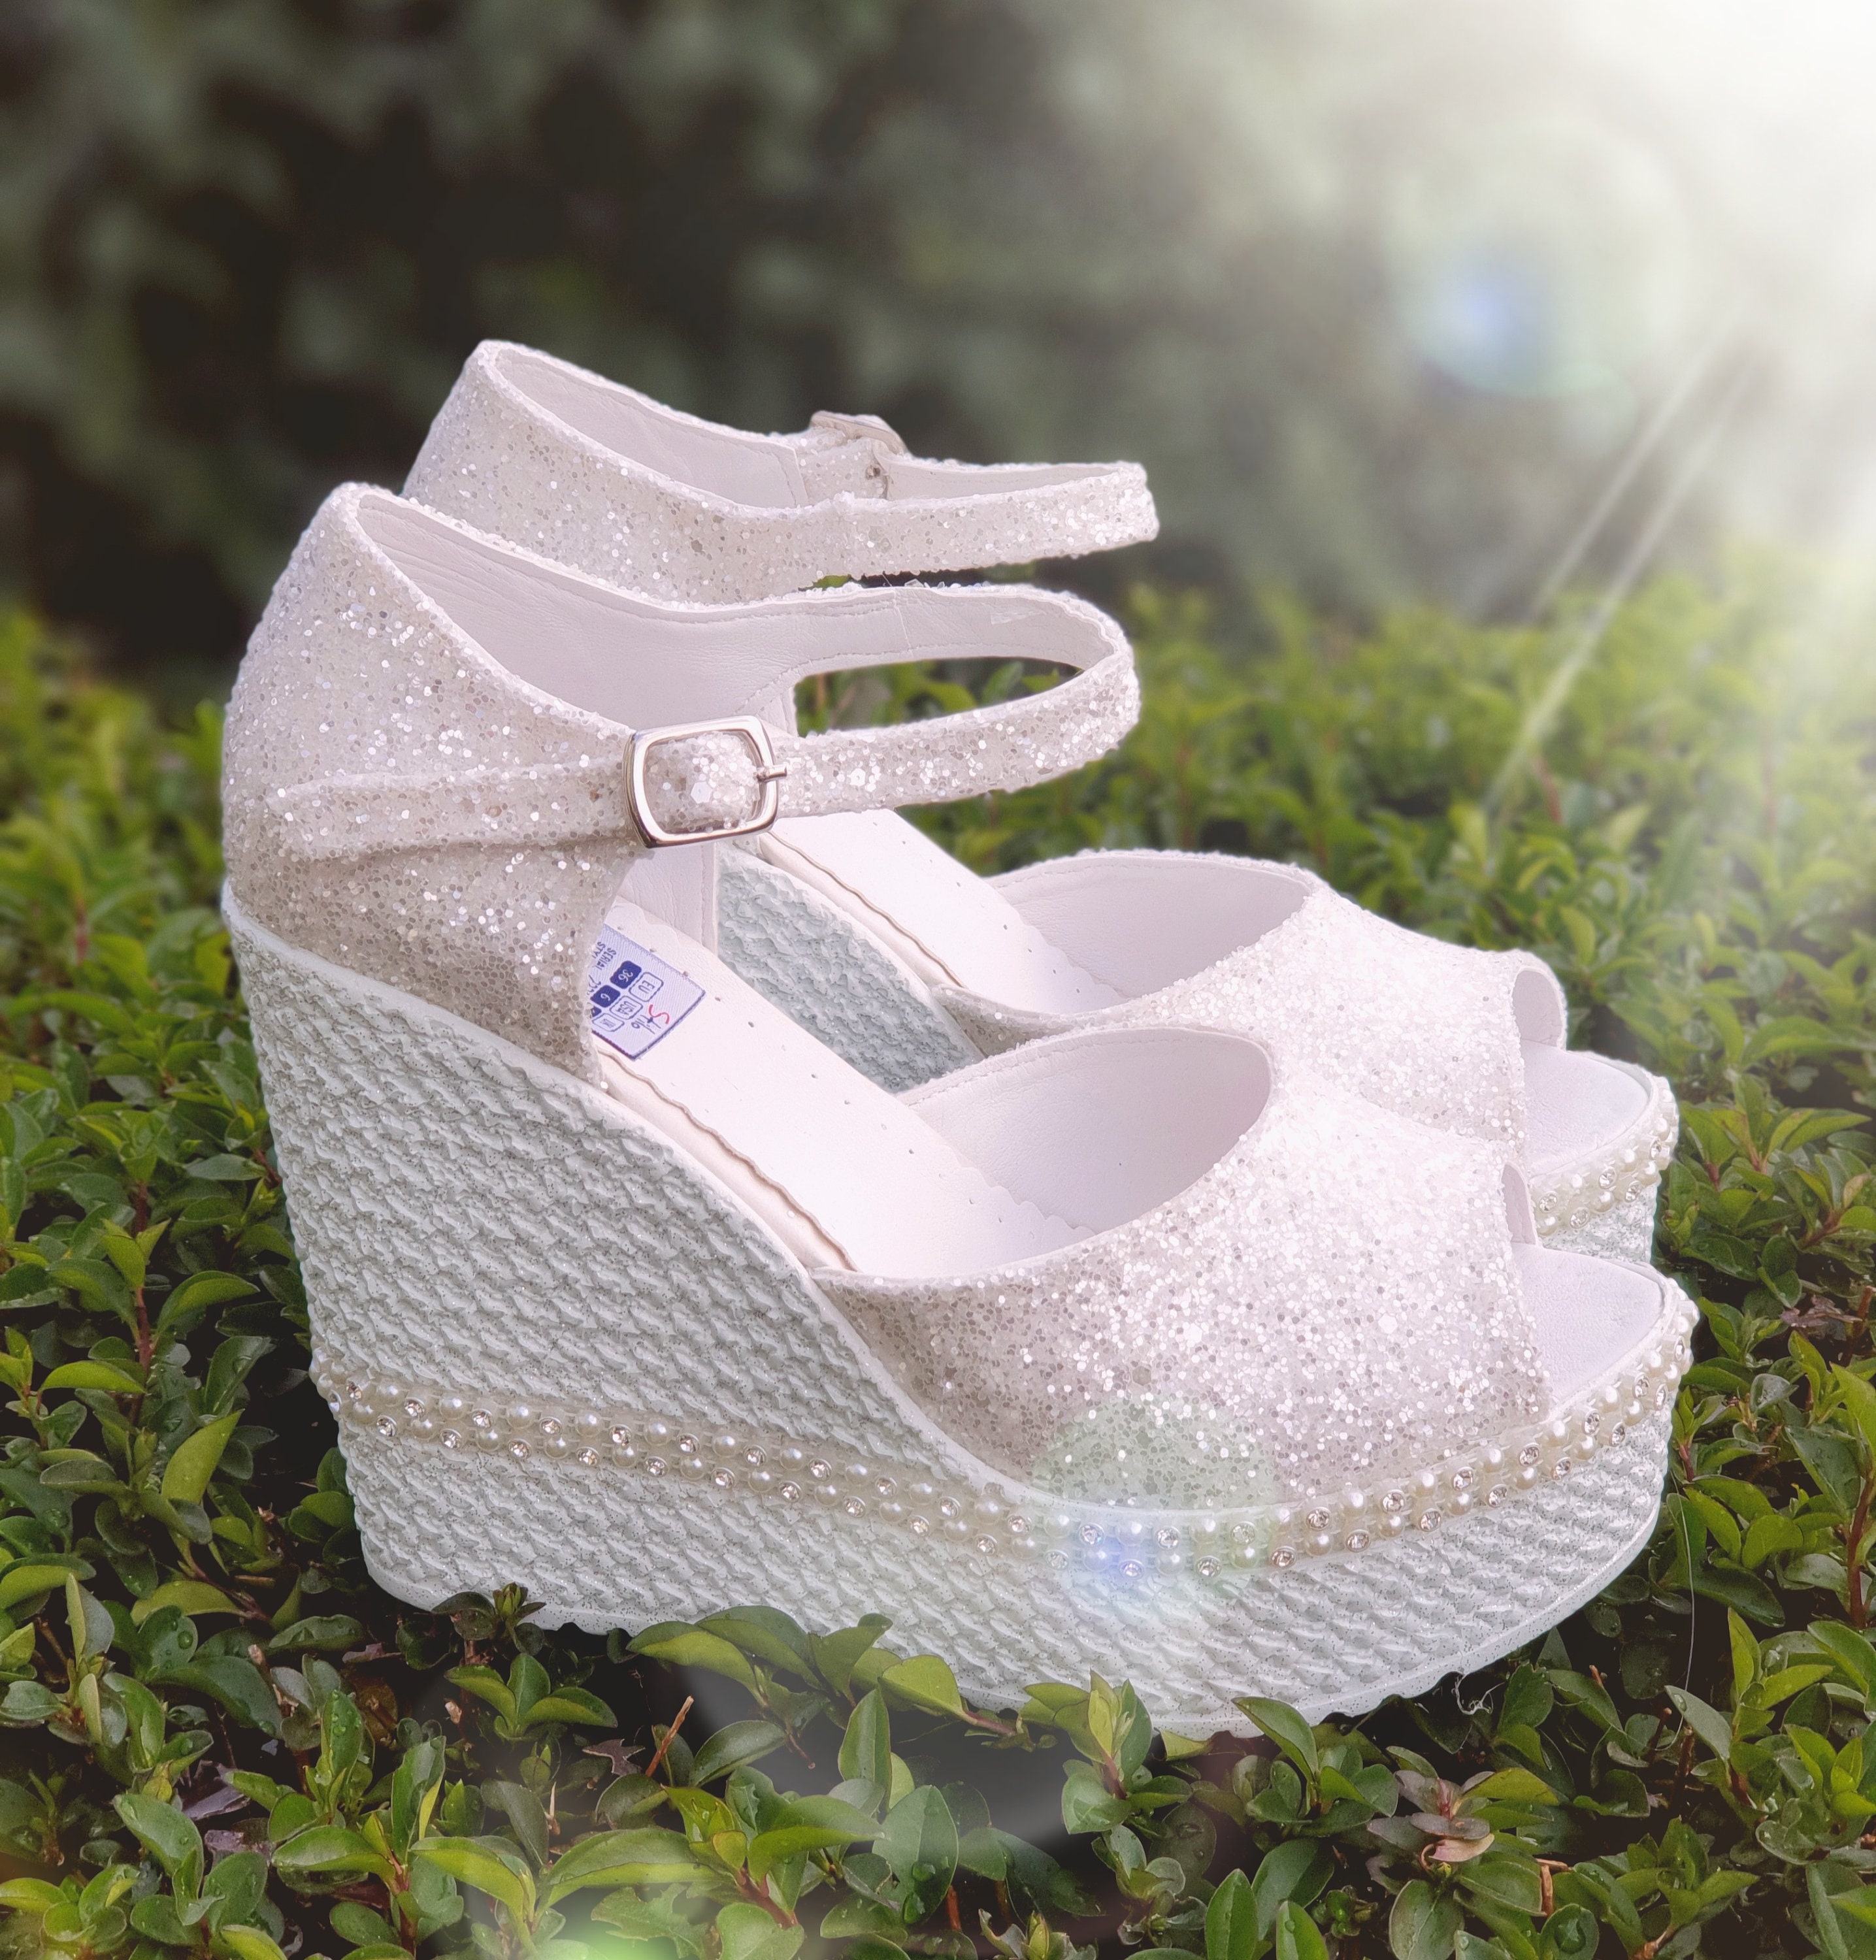 Bridal Shoes With Wedge Heels Very Comfortable and Stylish - Etsy Denmark